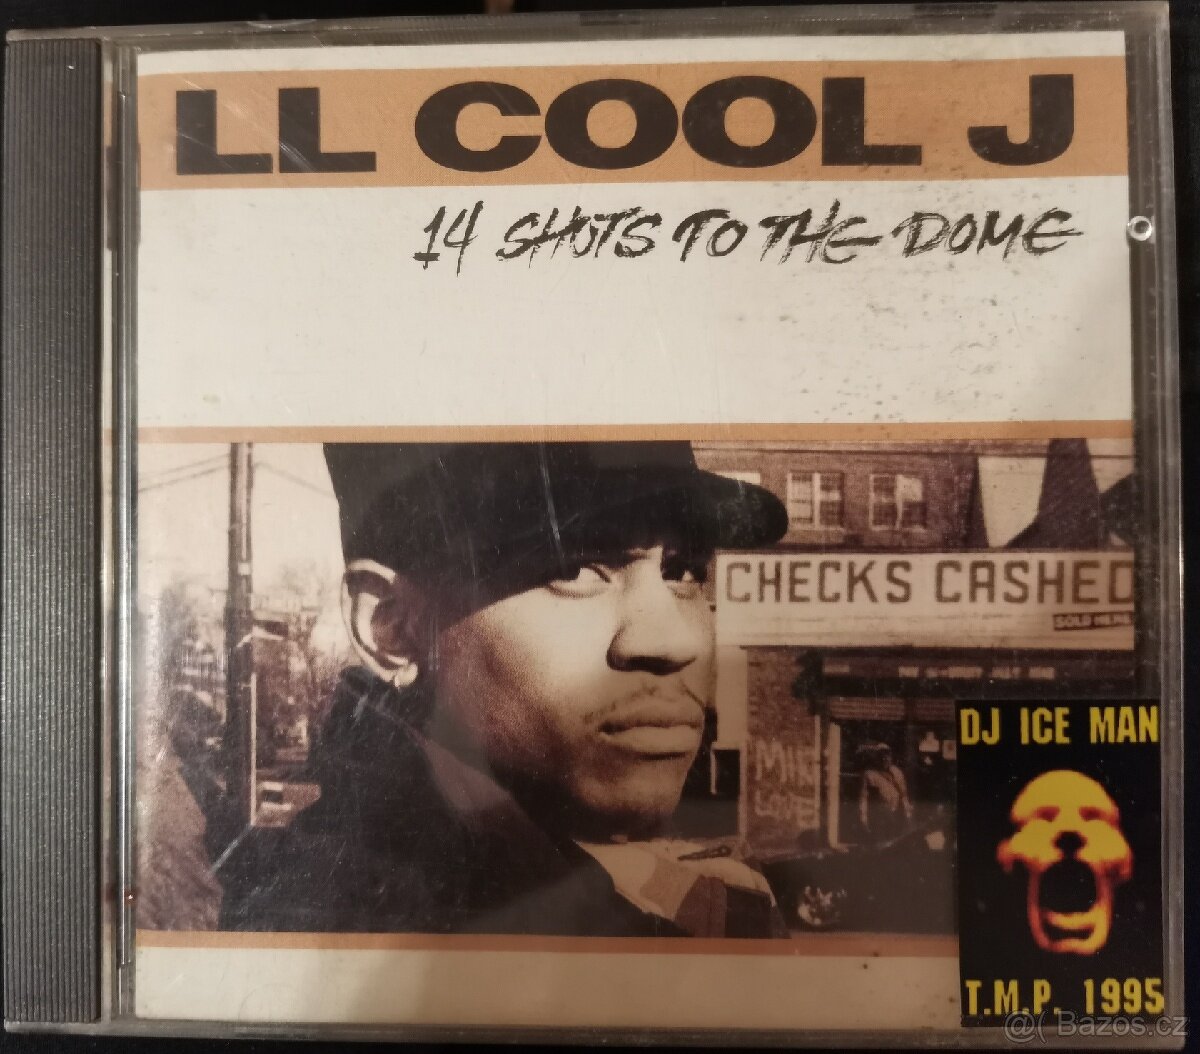 CD LL COOL J - 14 SHOTS TO THE DOME